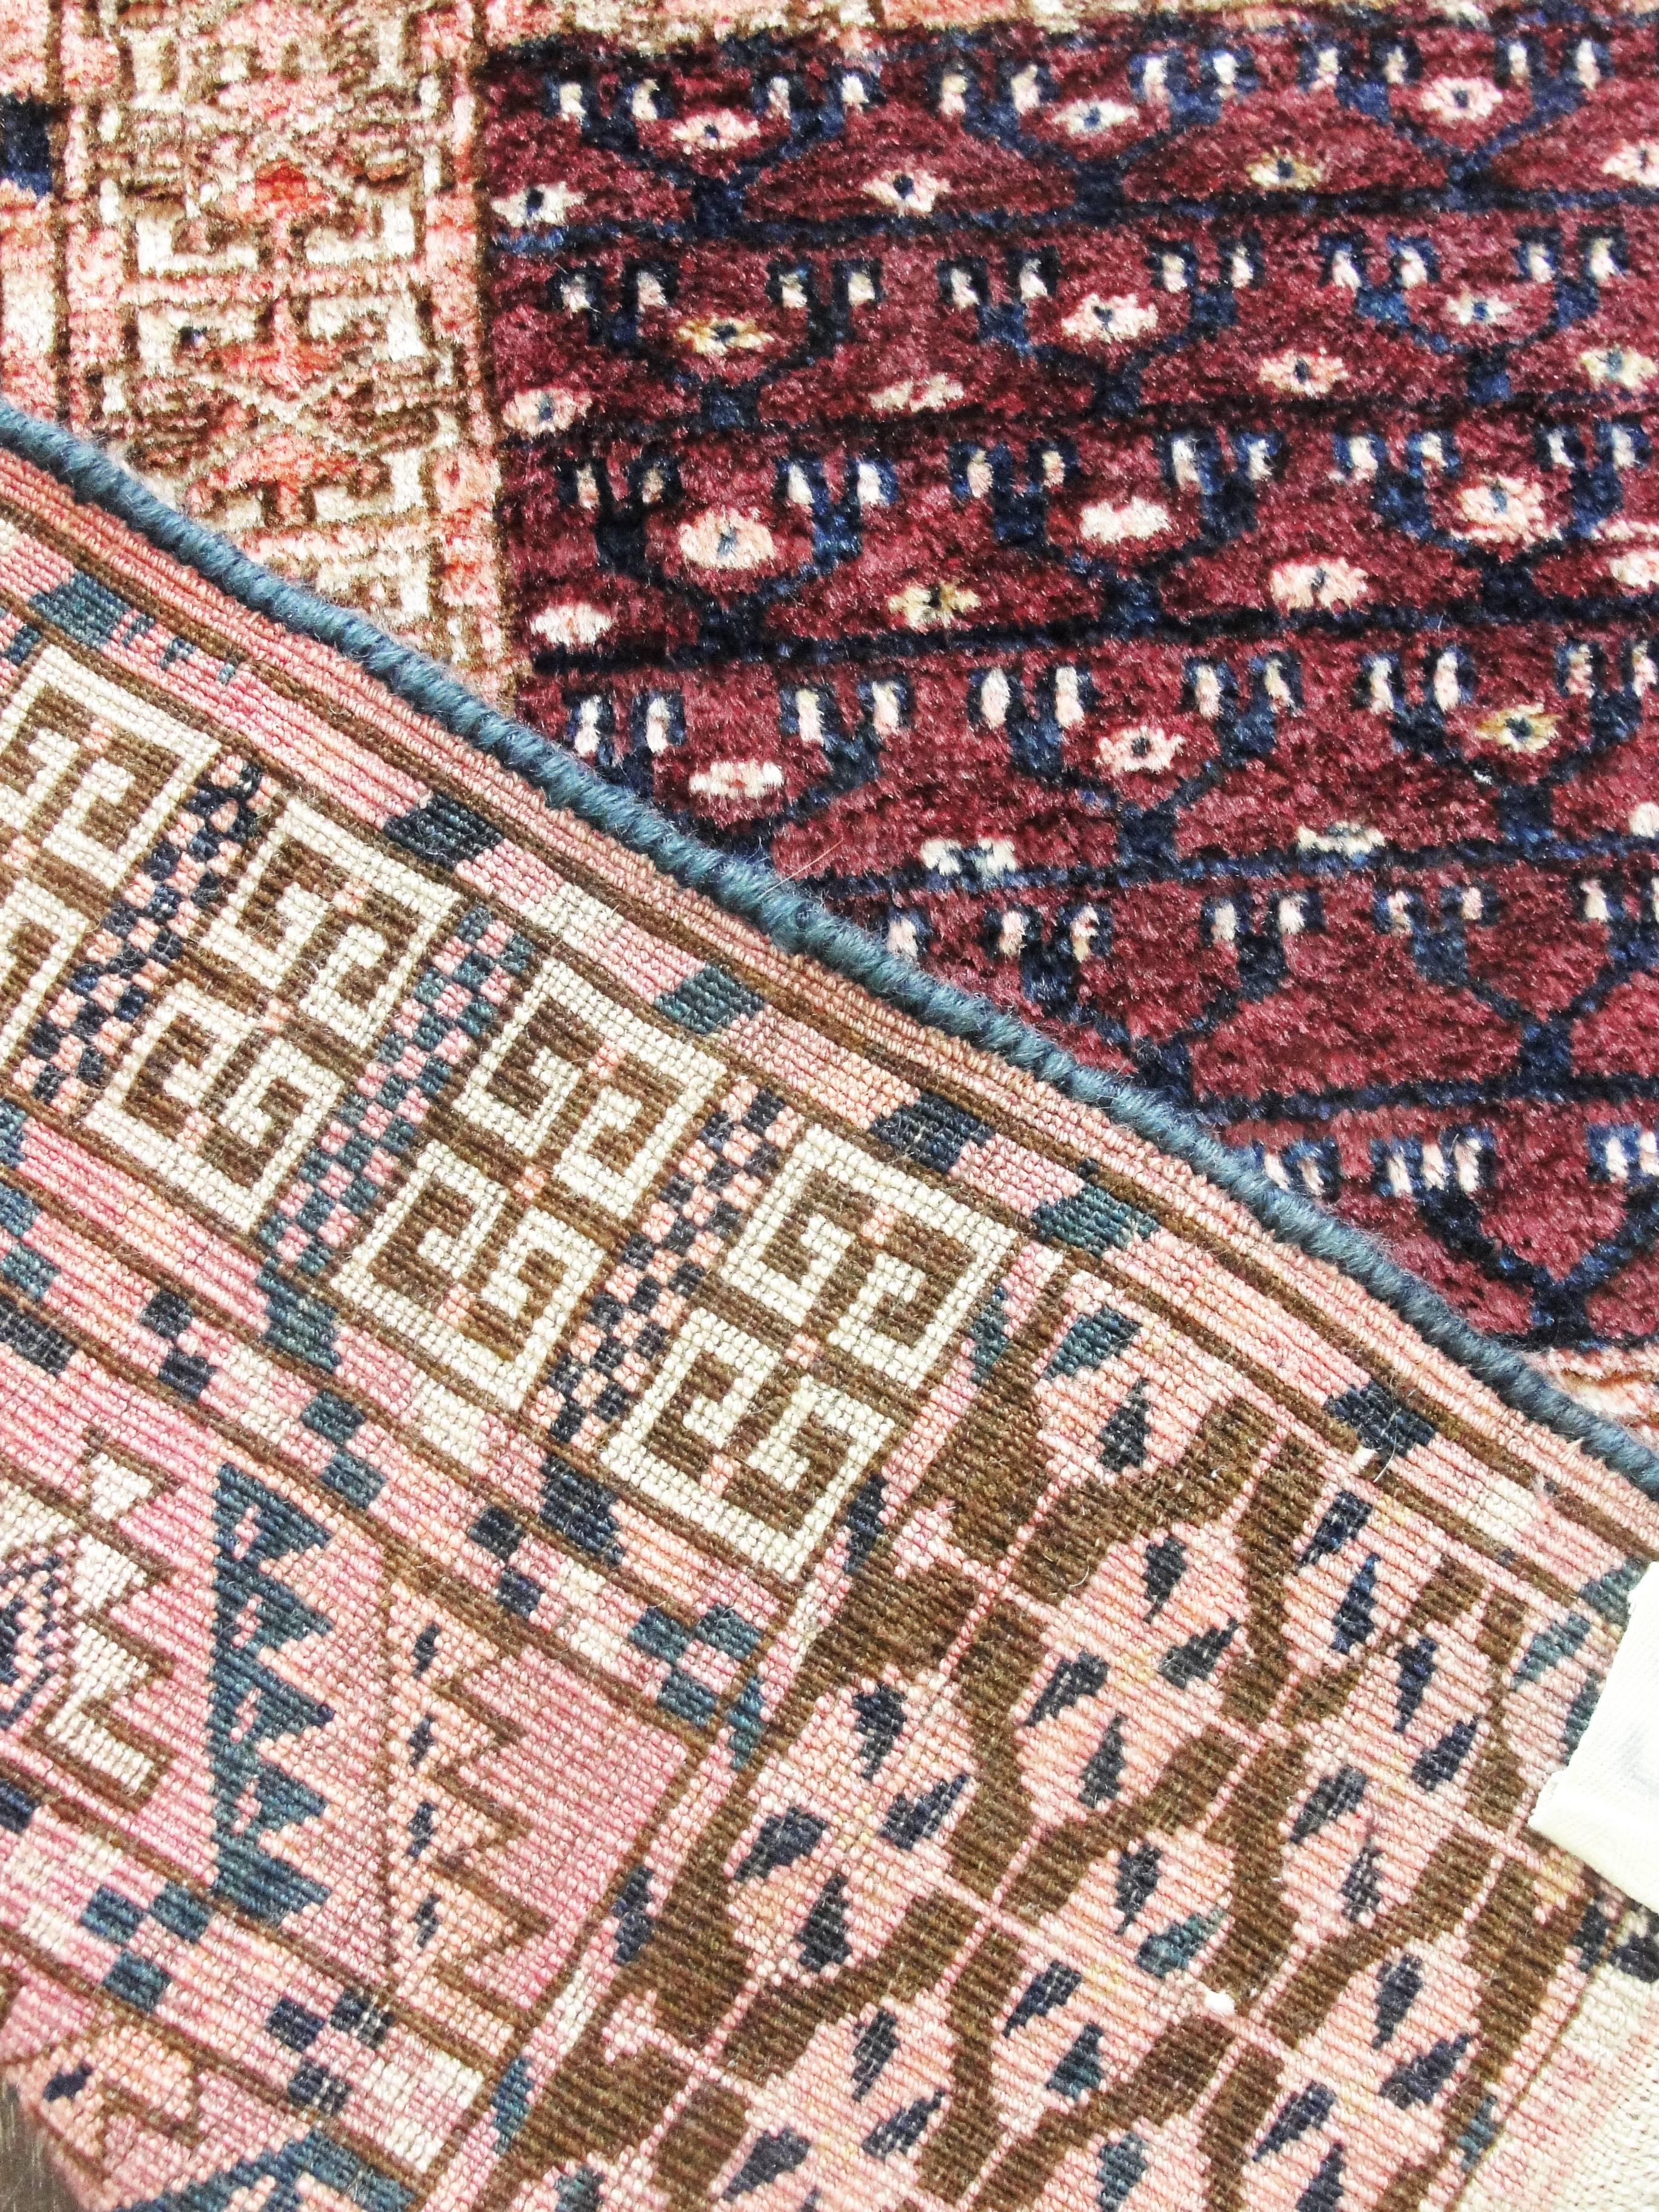 Almost all Turkmen rugs were produced by nomadic tribes almost entirely with locally obtained materials, wool from the herds and vegetable dyes, or other natural dyes from the land. They used geometrical designs that varied from tribe to tribe; most